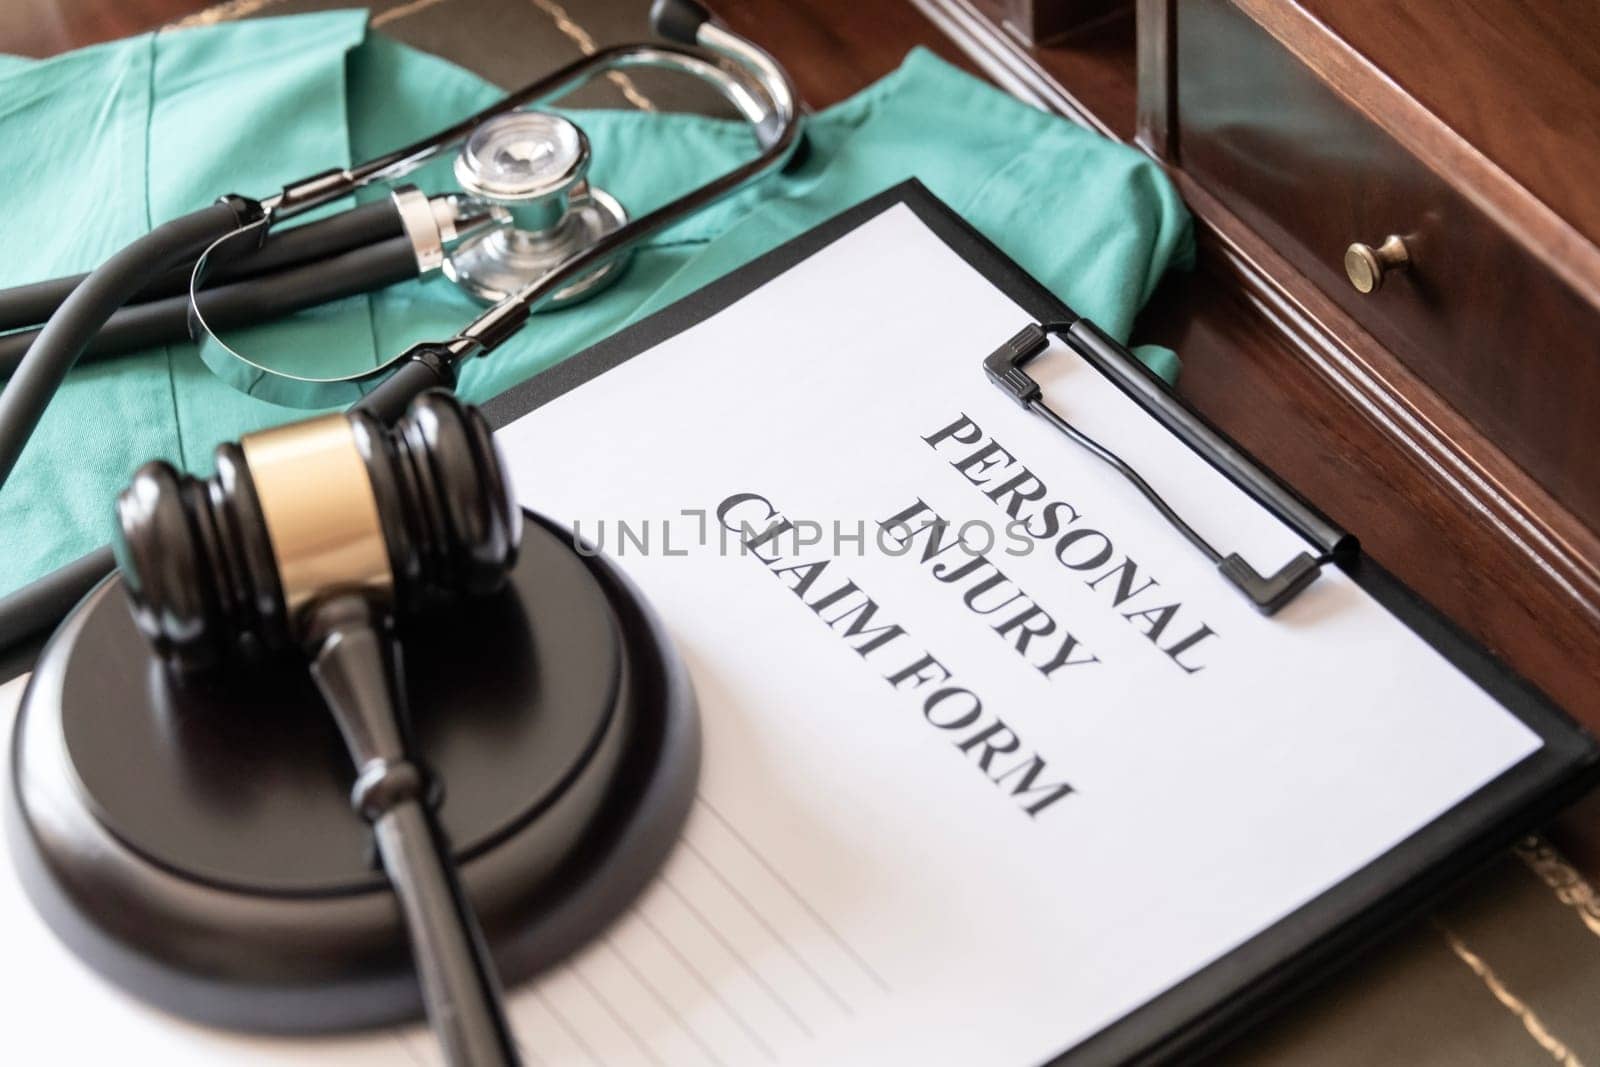 Medical Claim Form with Stethoscope on Doctor's Desk